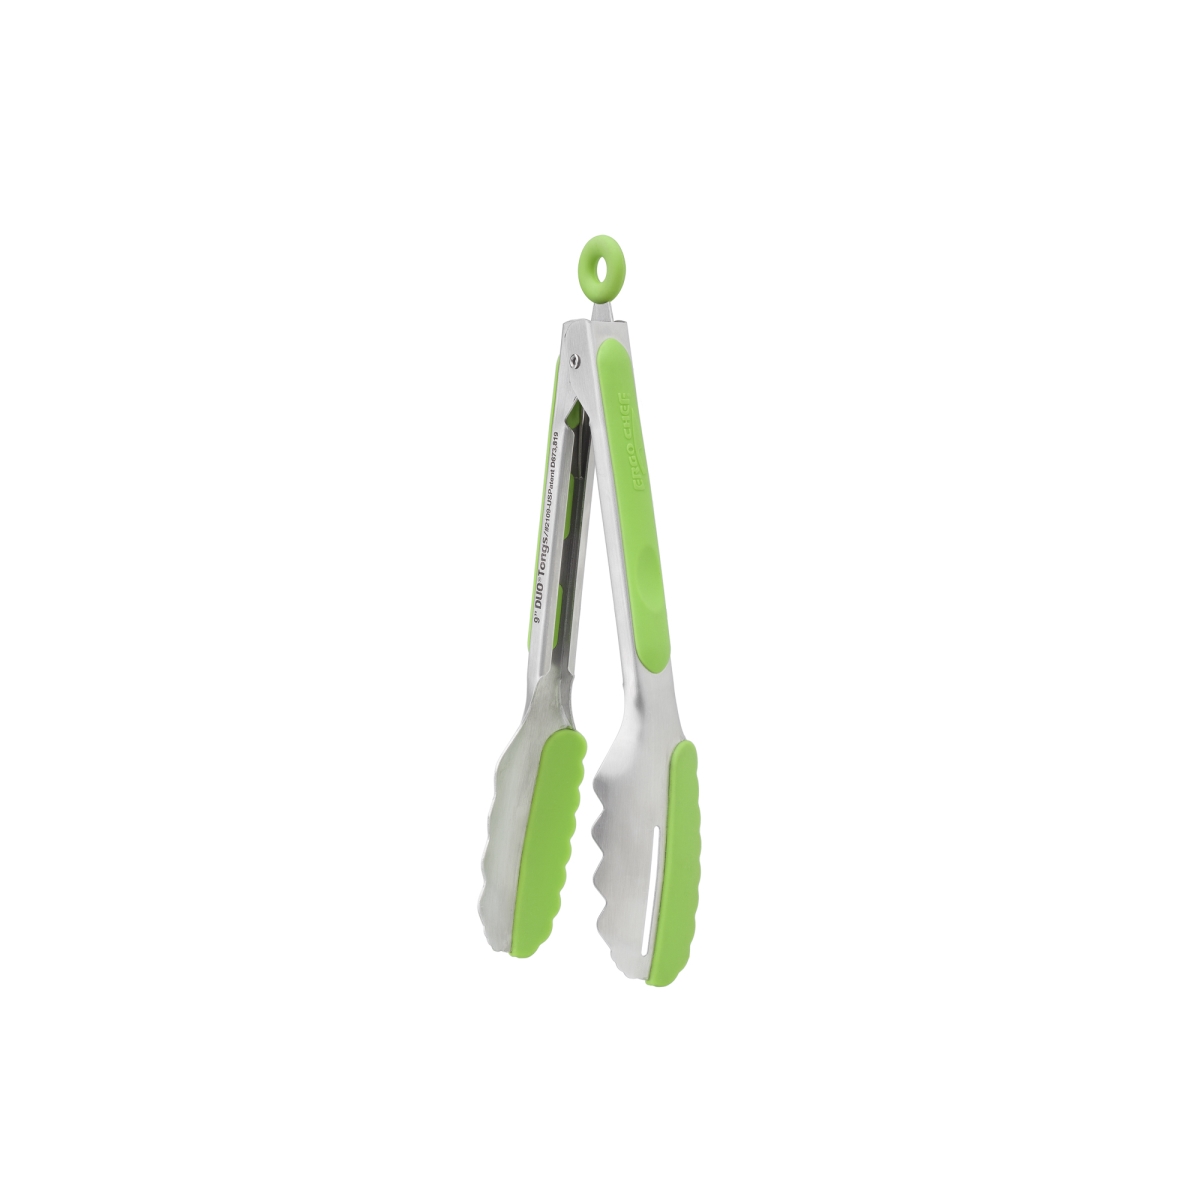 2109g 9 In. Green Silicone Kitchen Duo Tongs